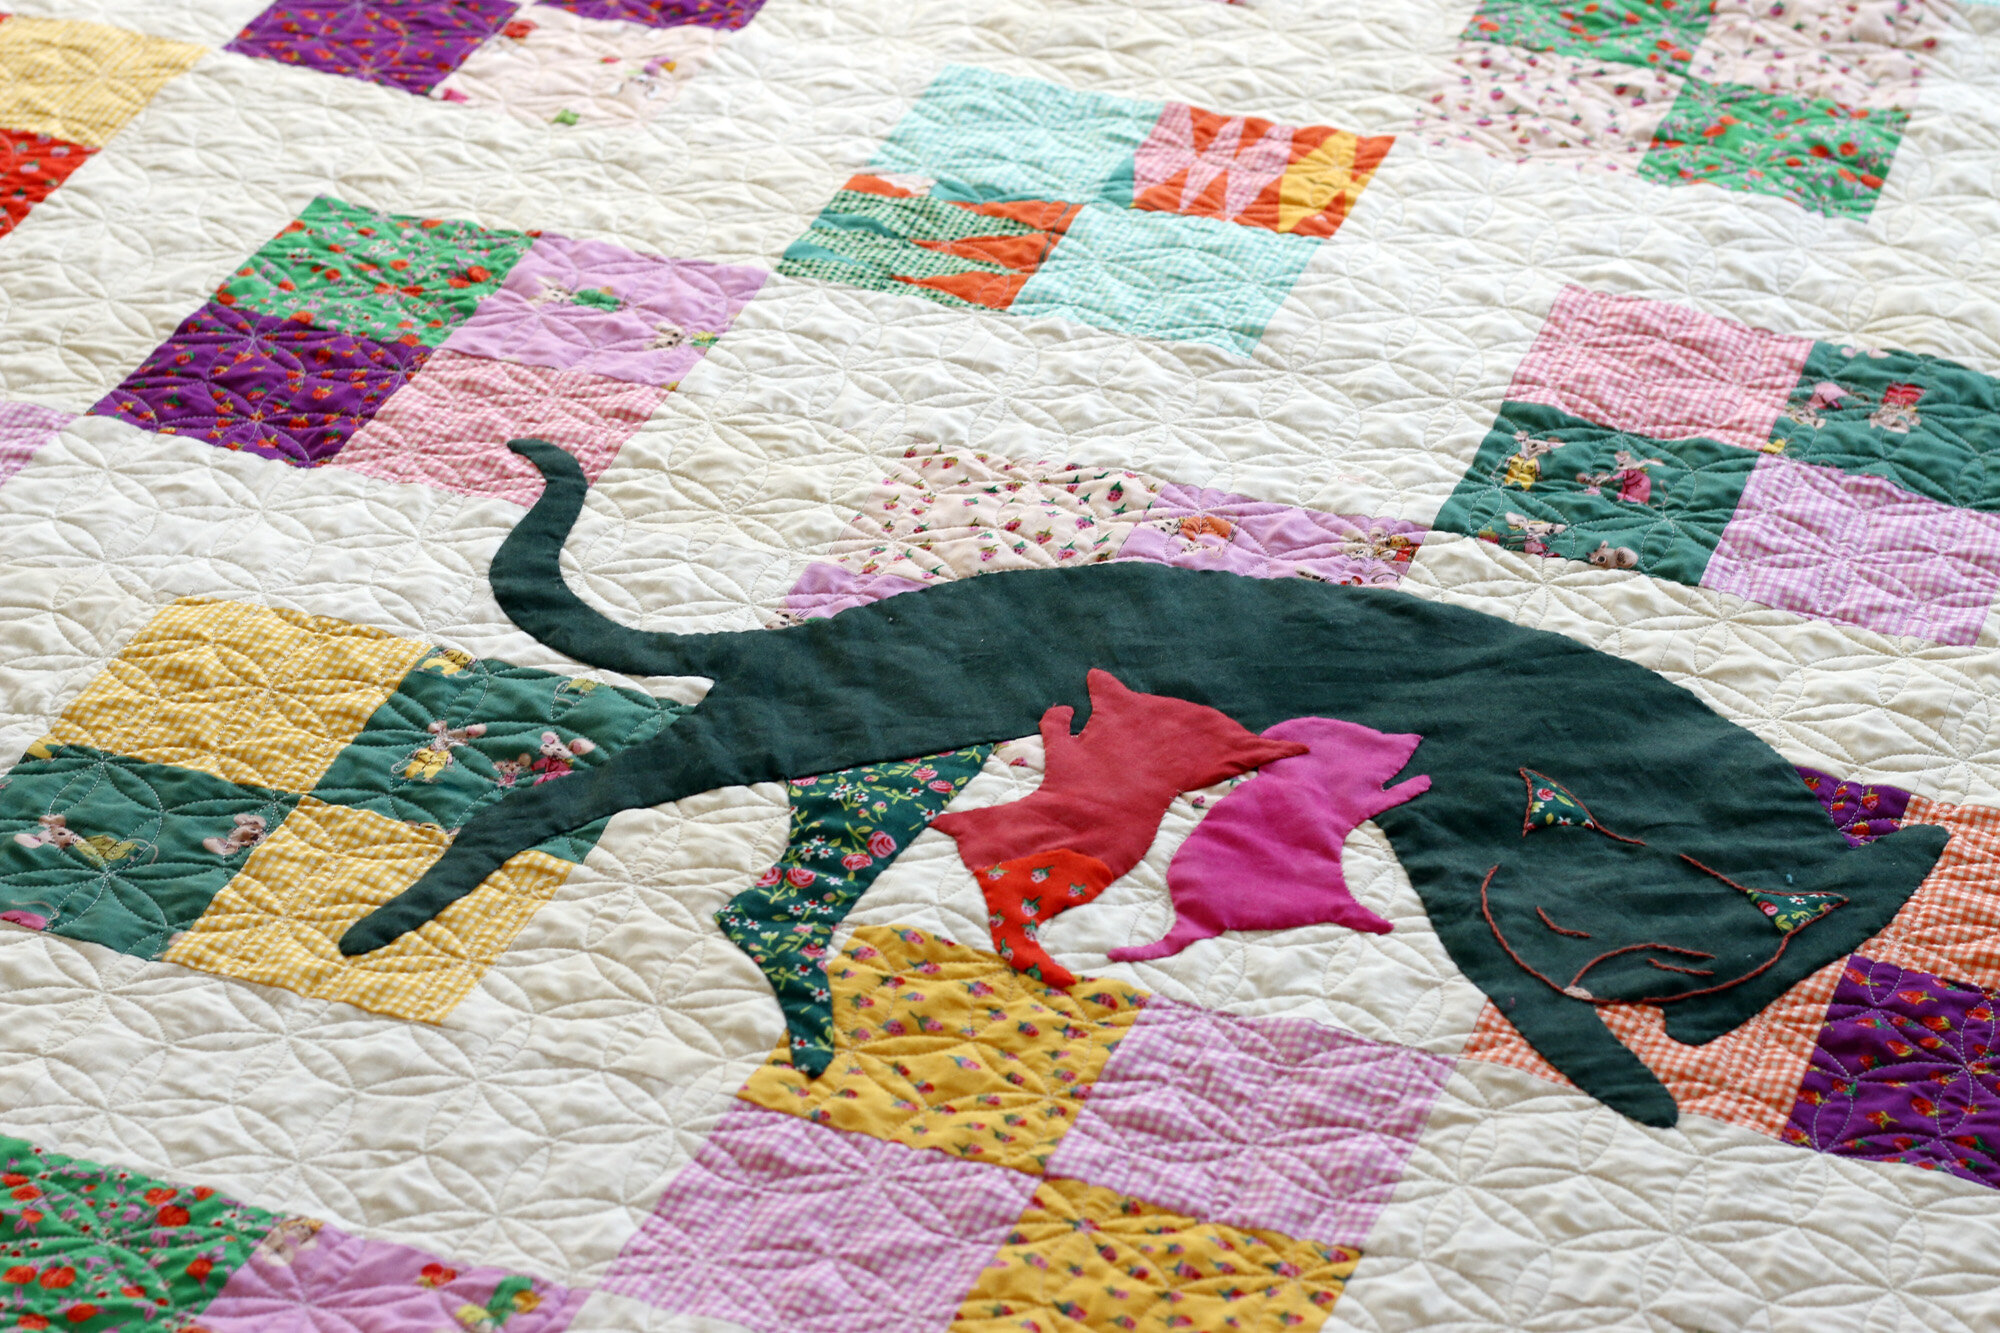 Mama Kitty applique quilt. Stitched in Color.jpg